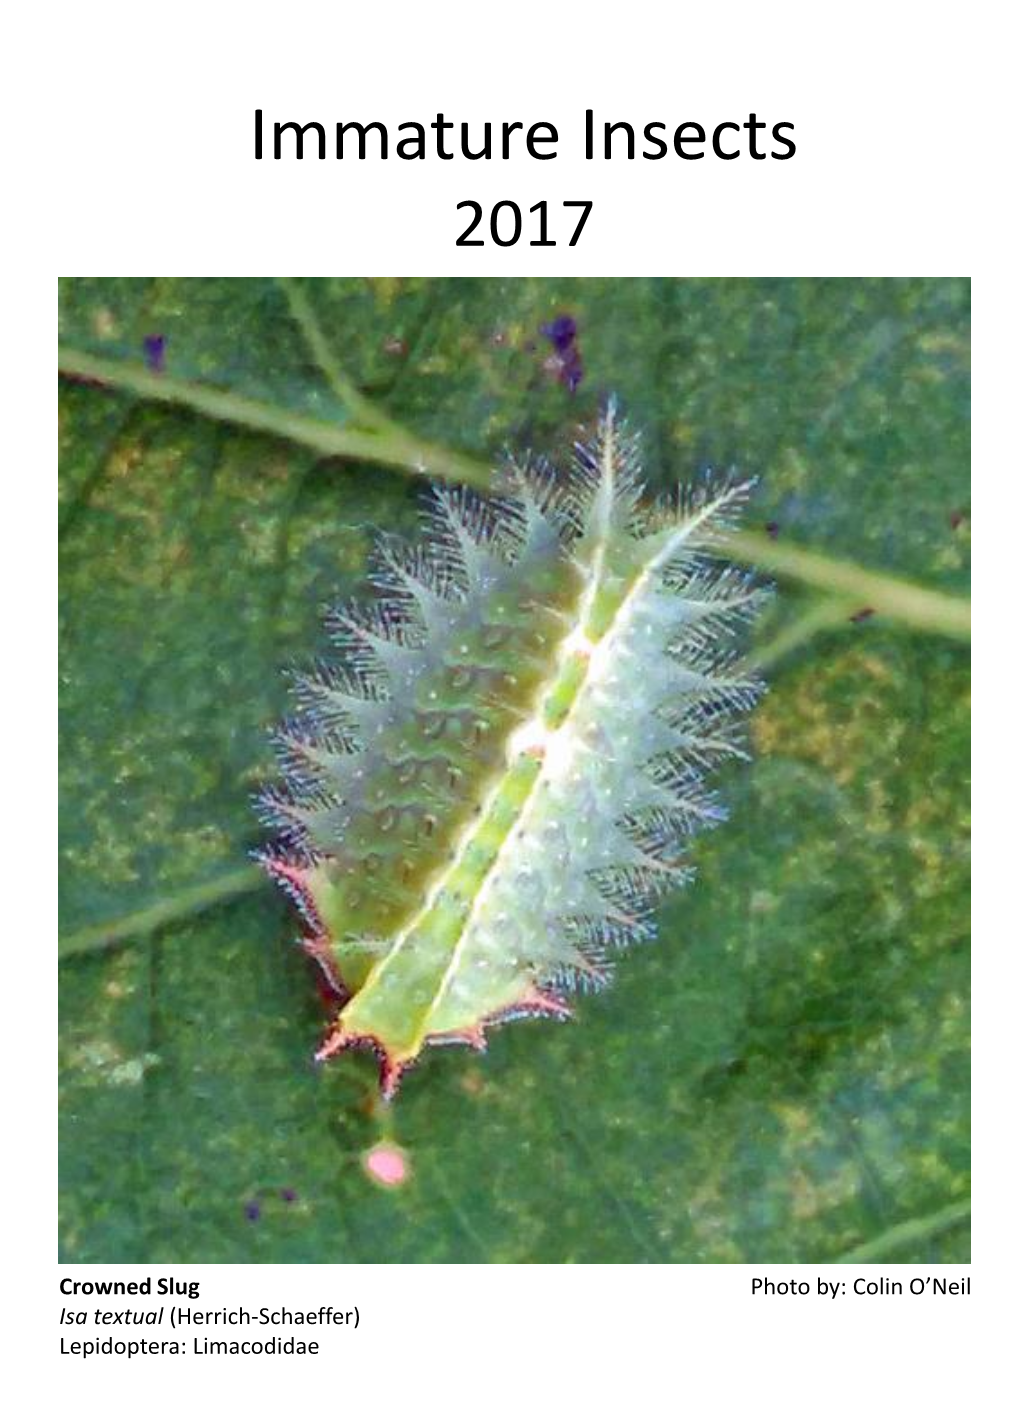 Immature Insects 2017 Calendar